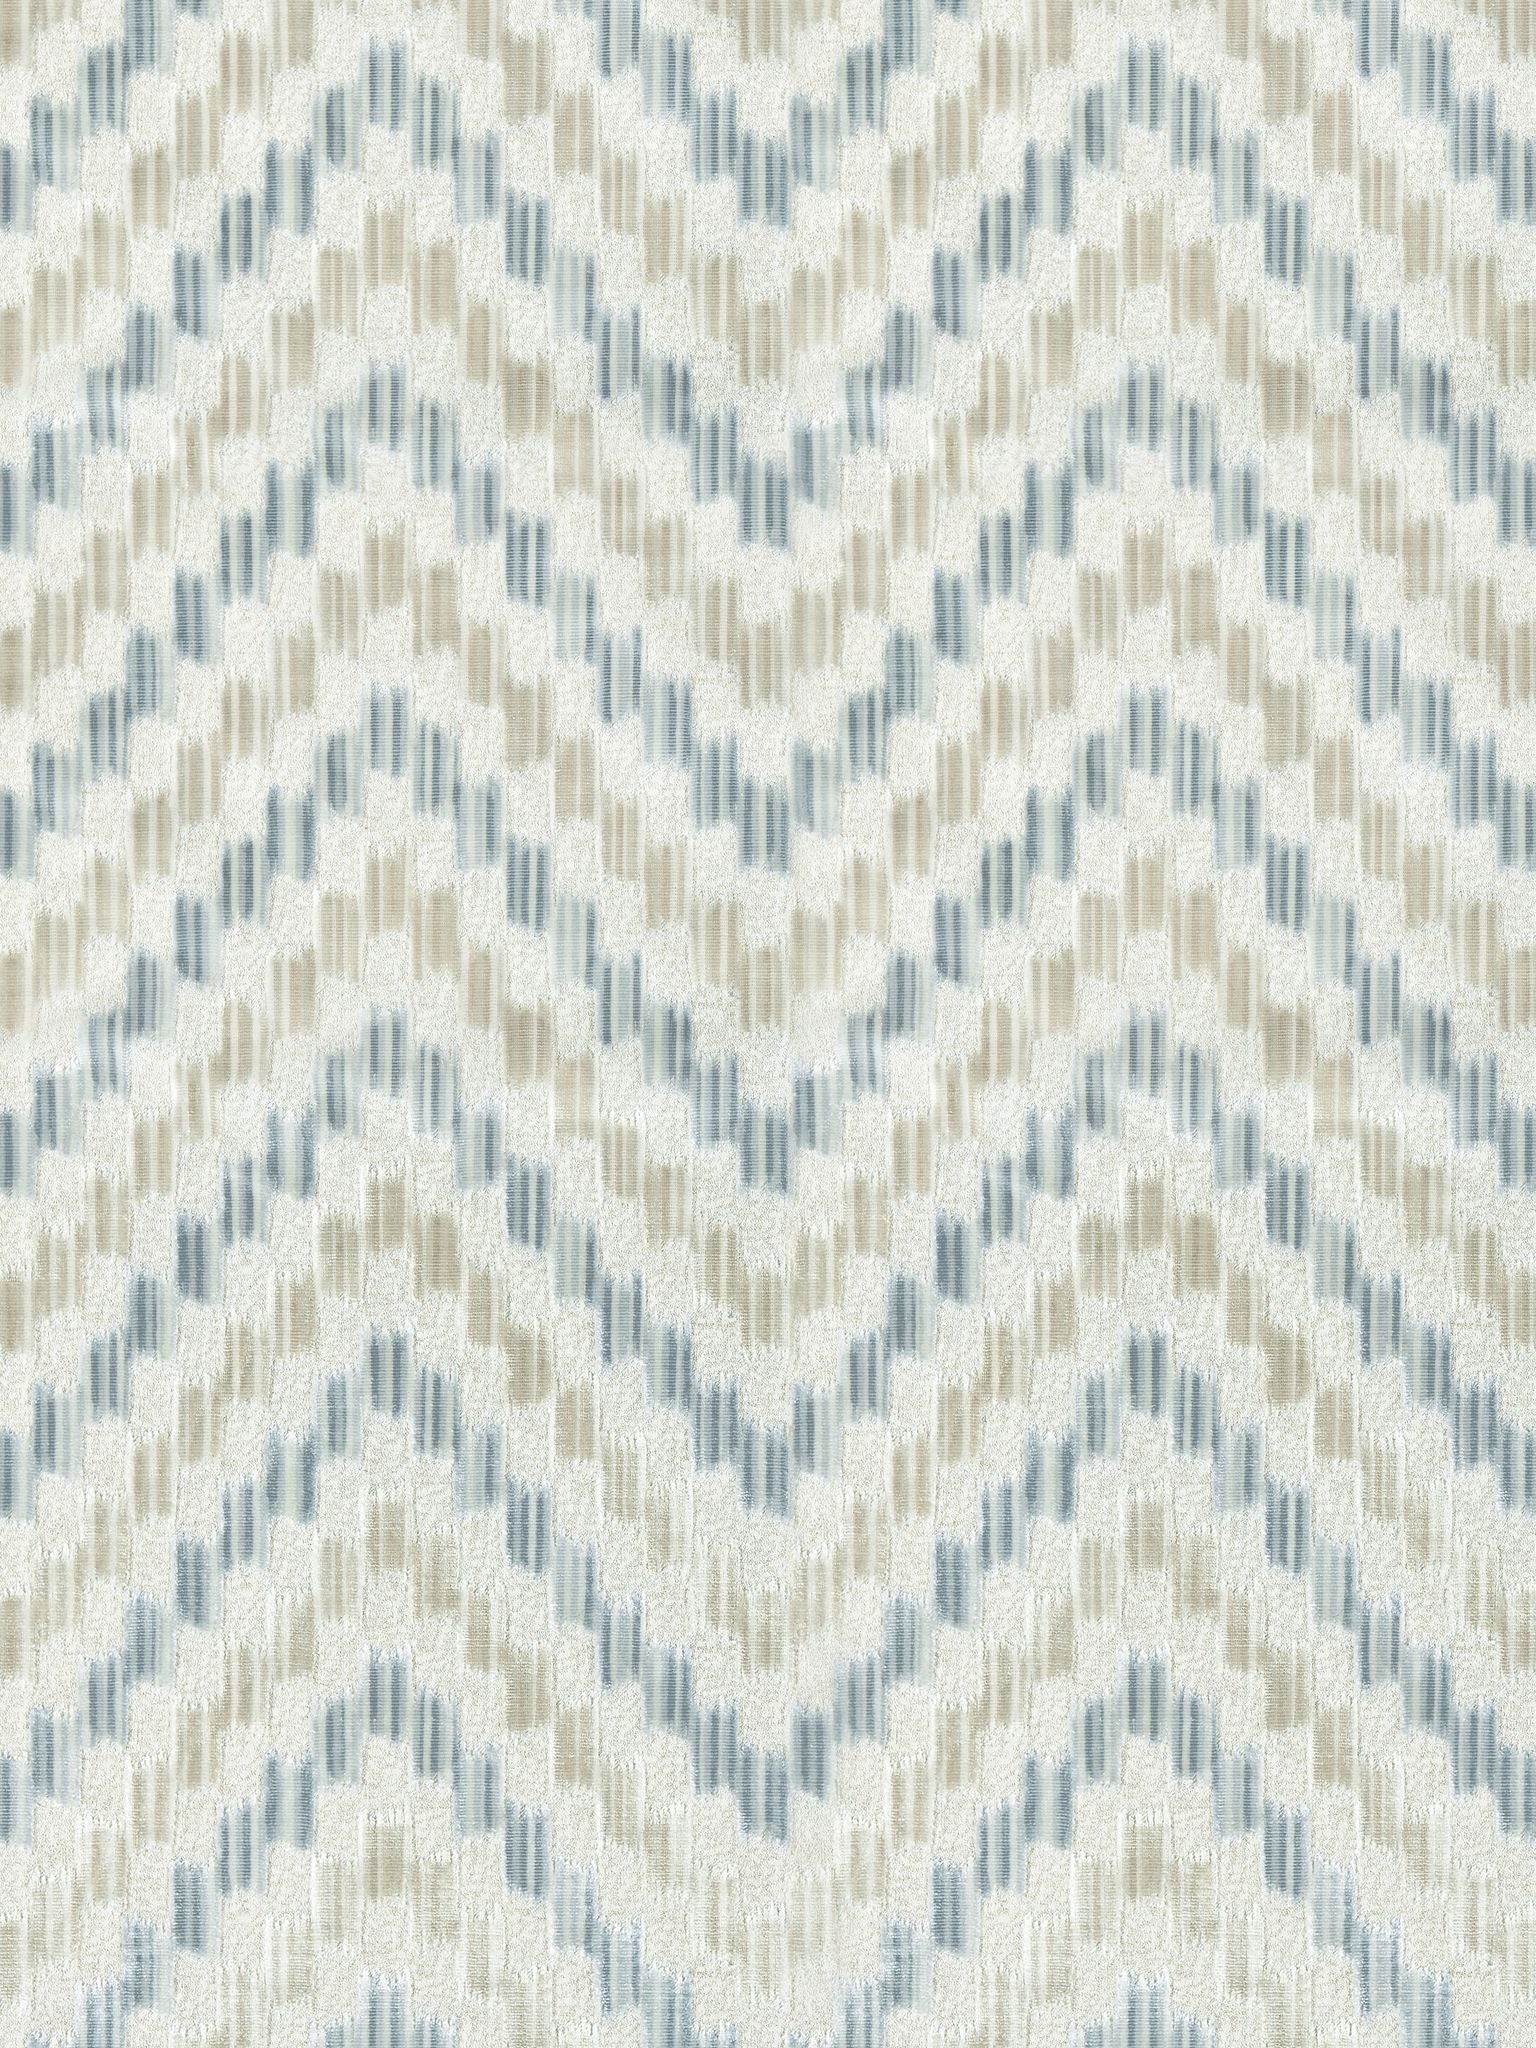 Ankara Velvet fabric in cloud color - pattern number SC 000227170 - by Scalamandre in the Scalamandre Fabrics Book 1 collection